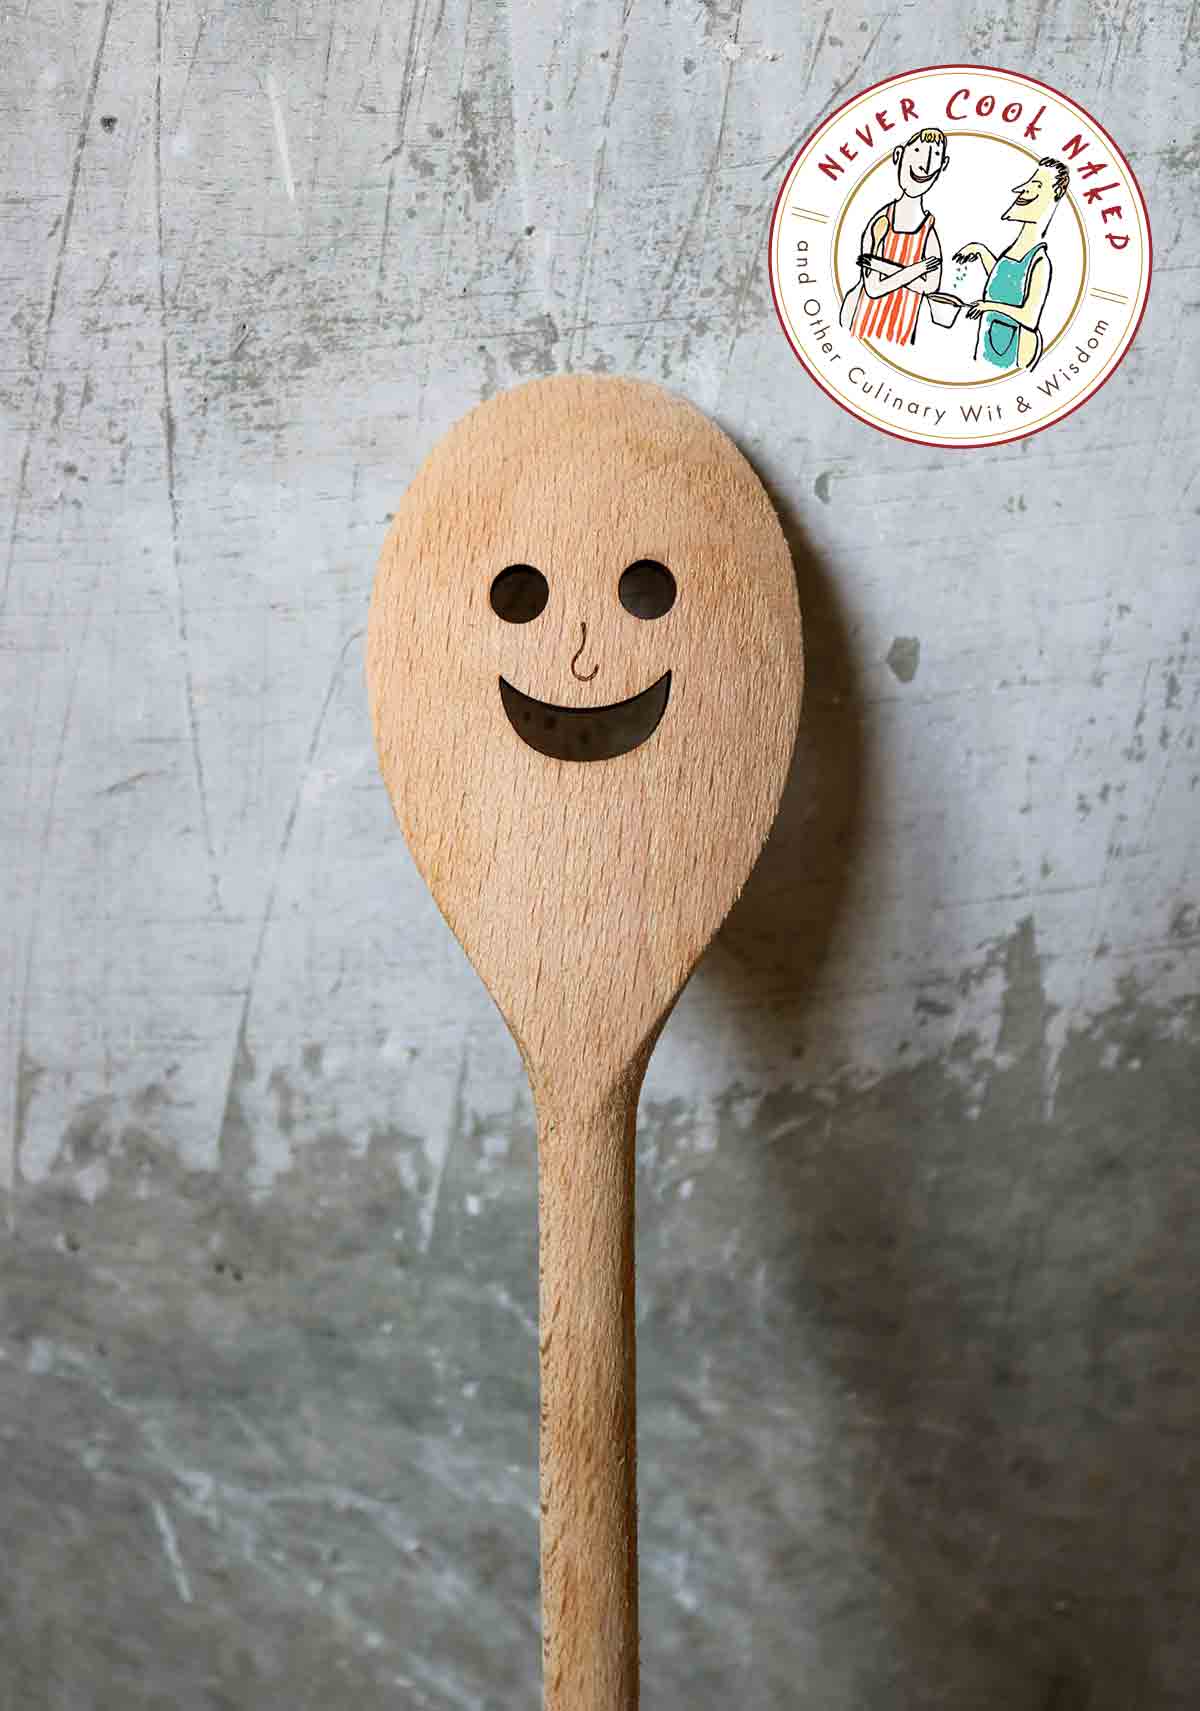 Wooden spoon with a black smiley face painted on it with a gray background.